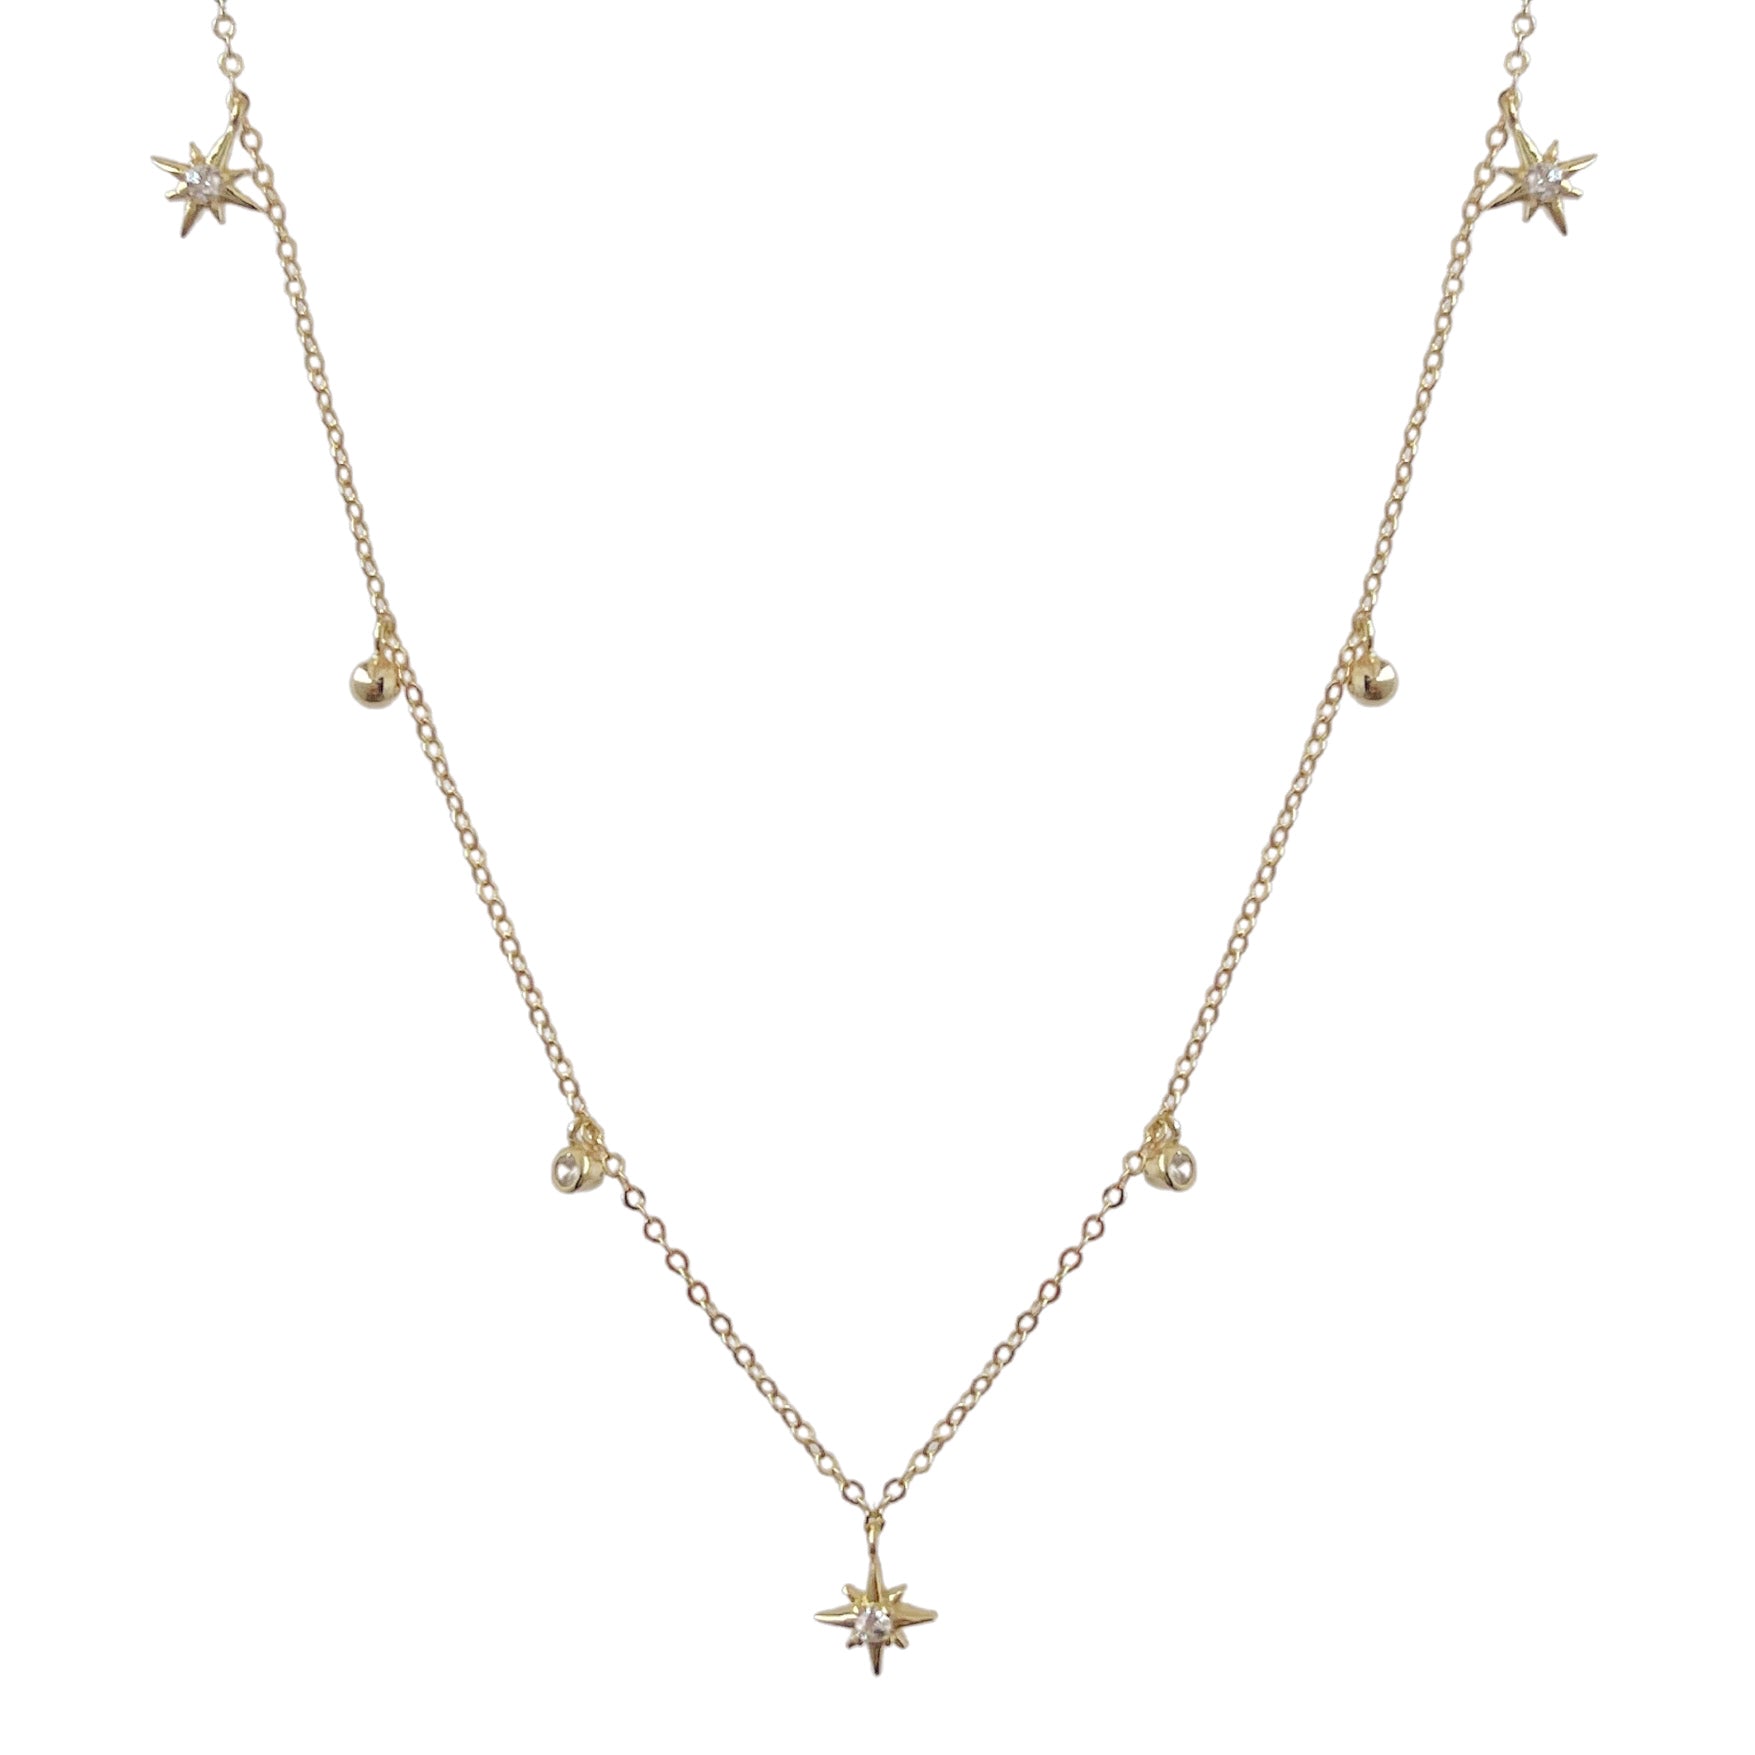 North Star Dangles Necklace